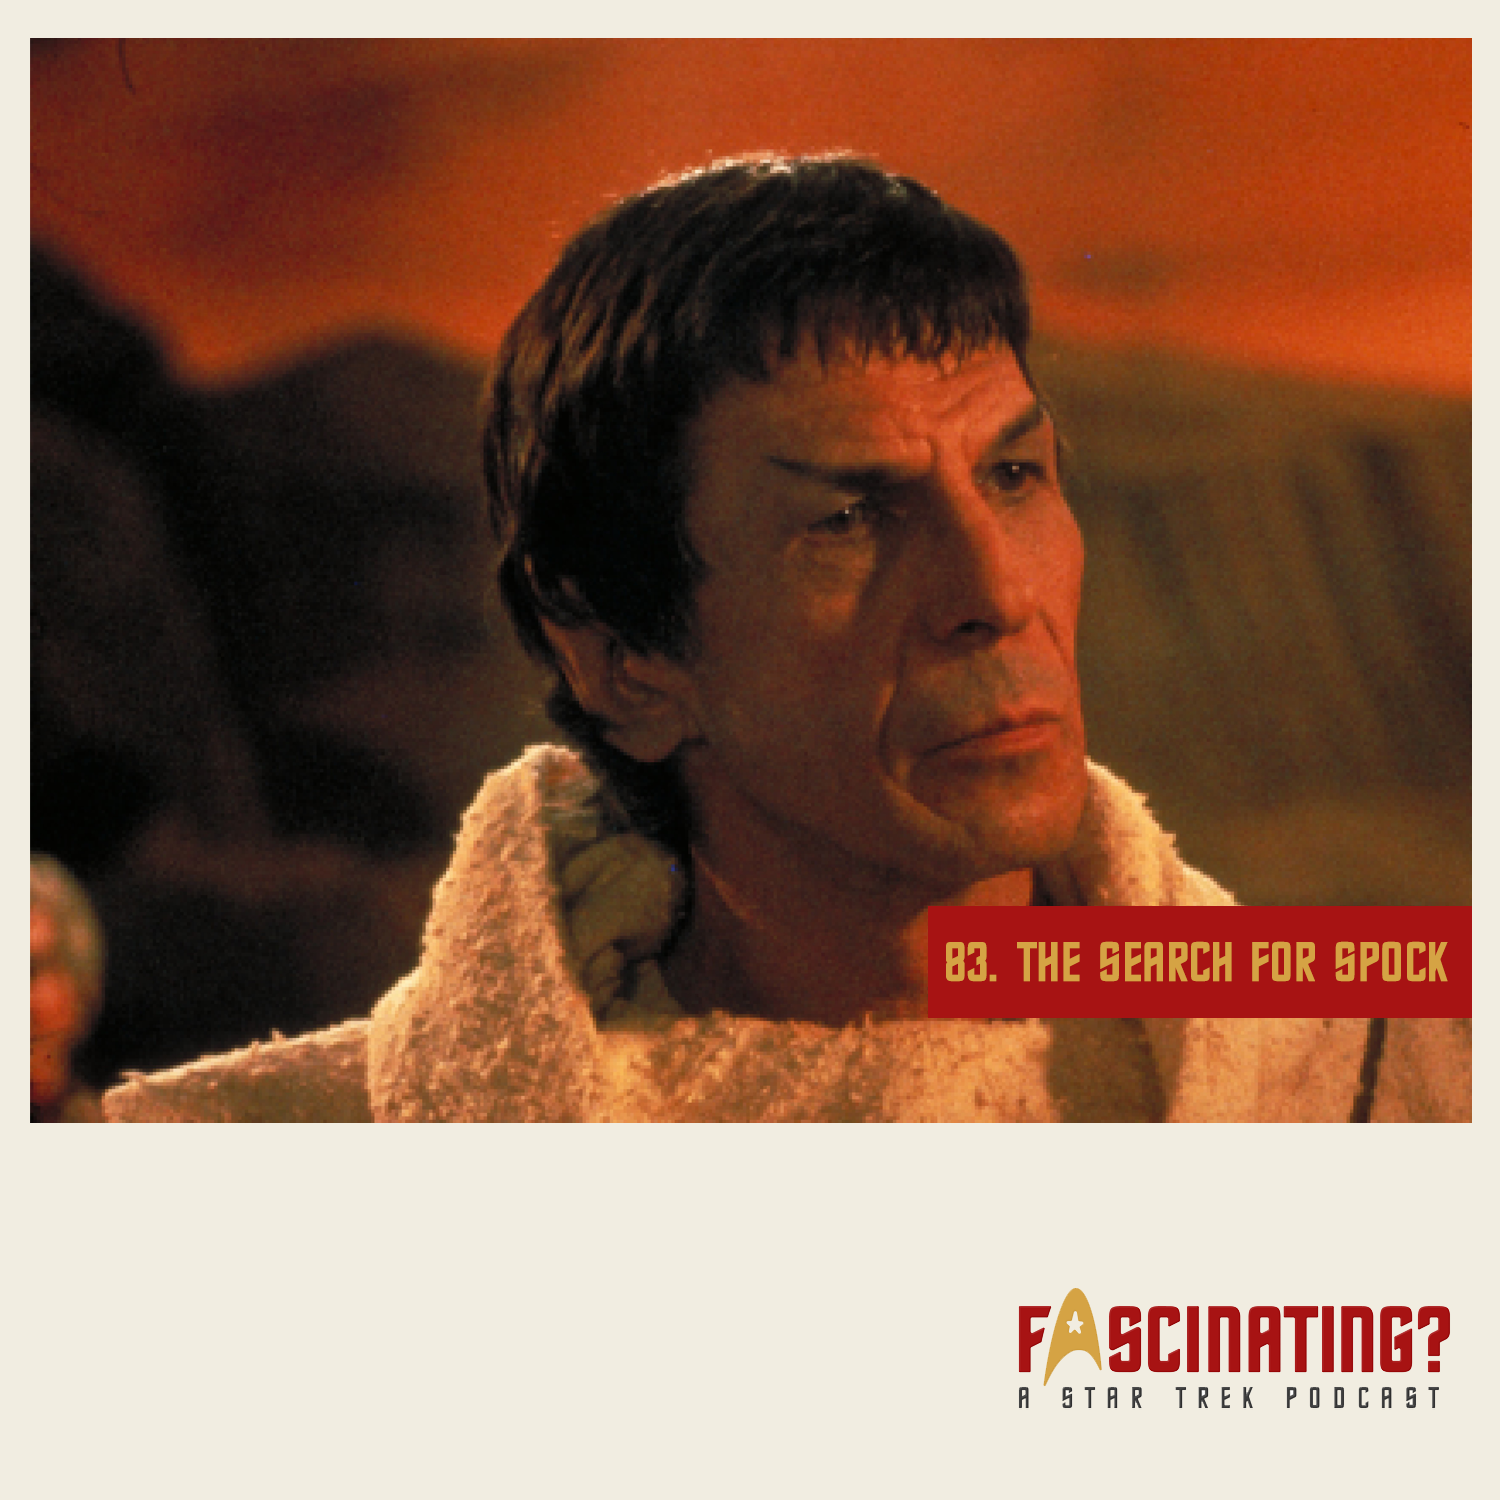 Star Trek III: The Search For Spock – Episode 83